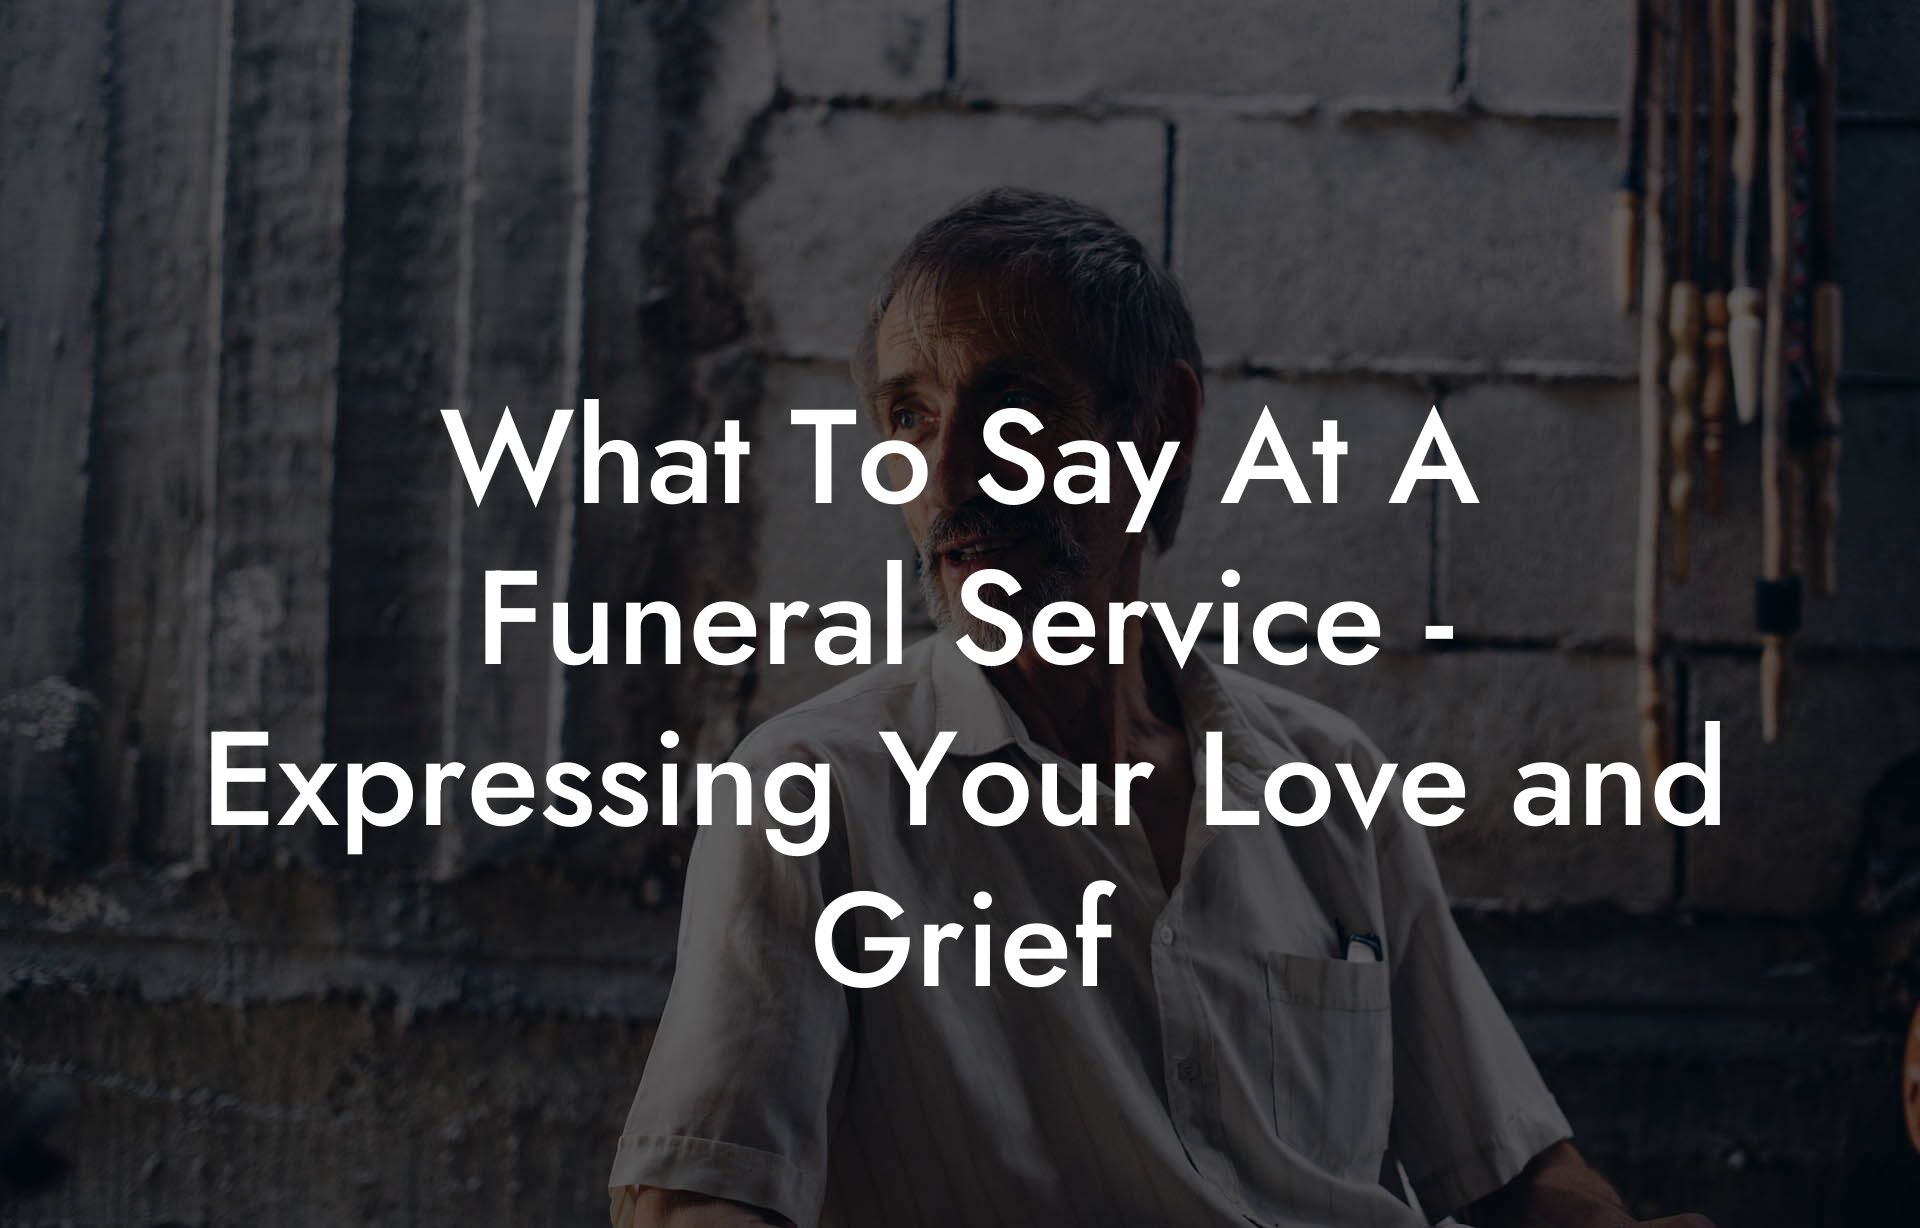 What To Say At A Funeral Service - Expressing Your Love and Grief